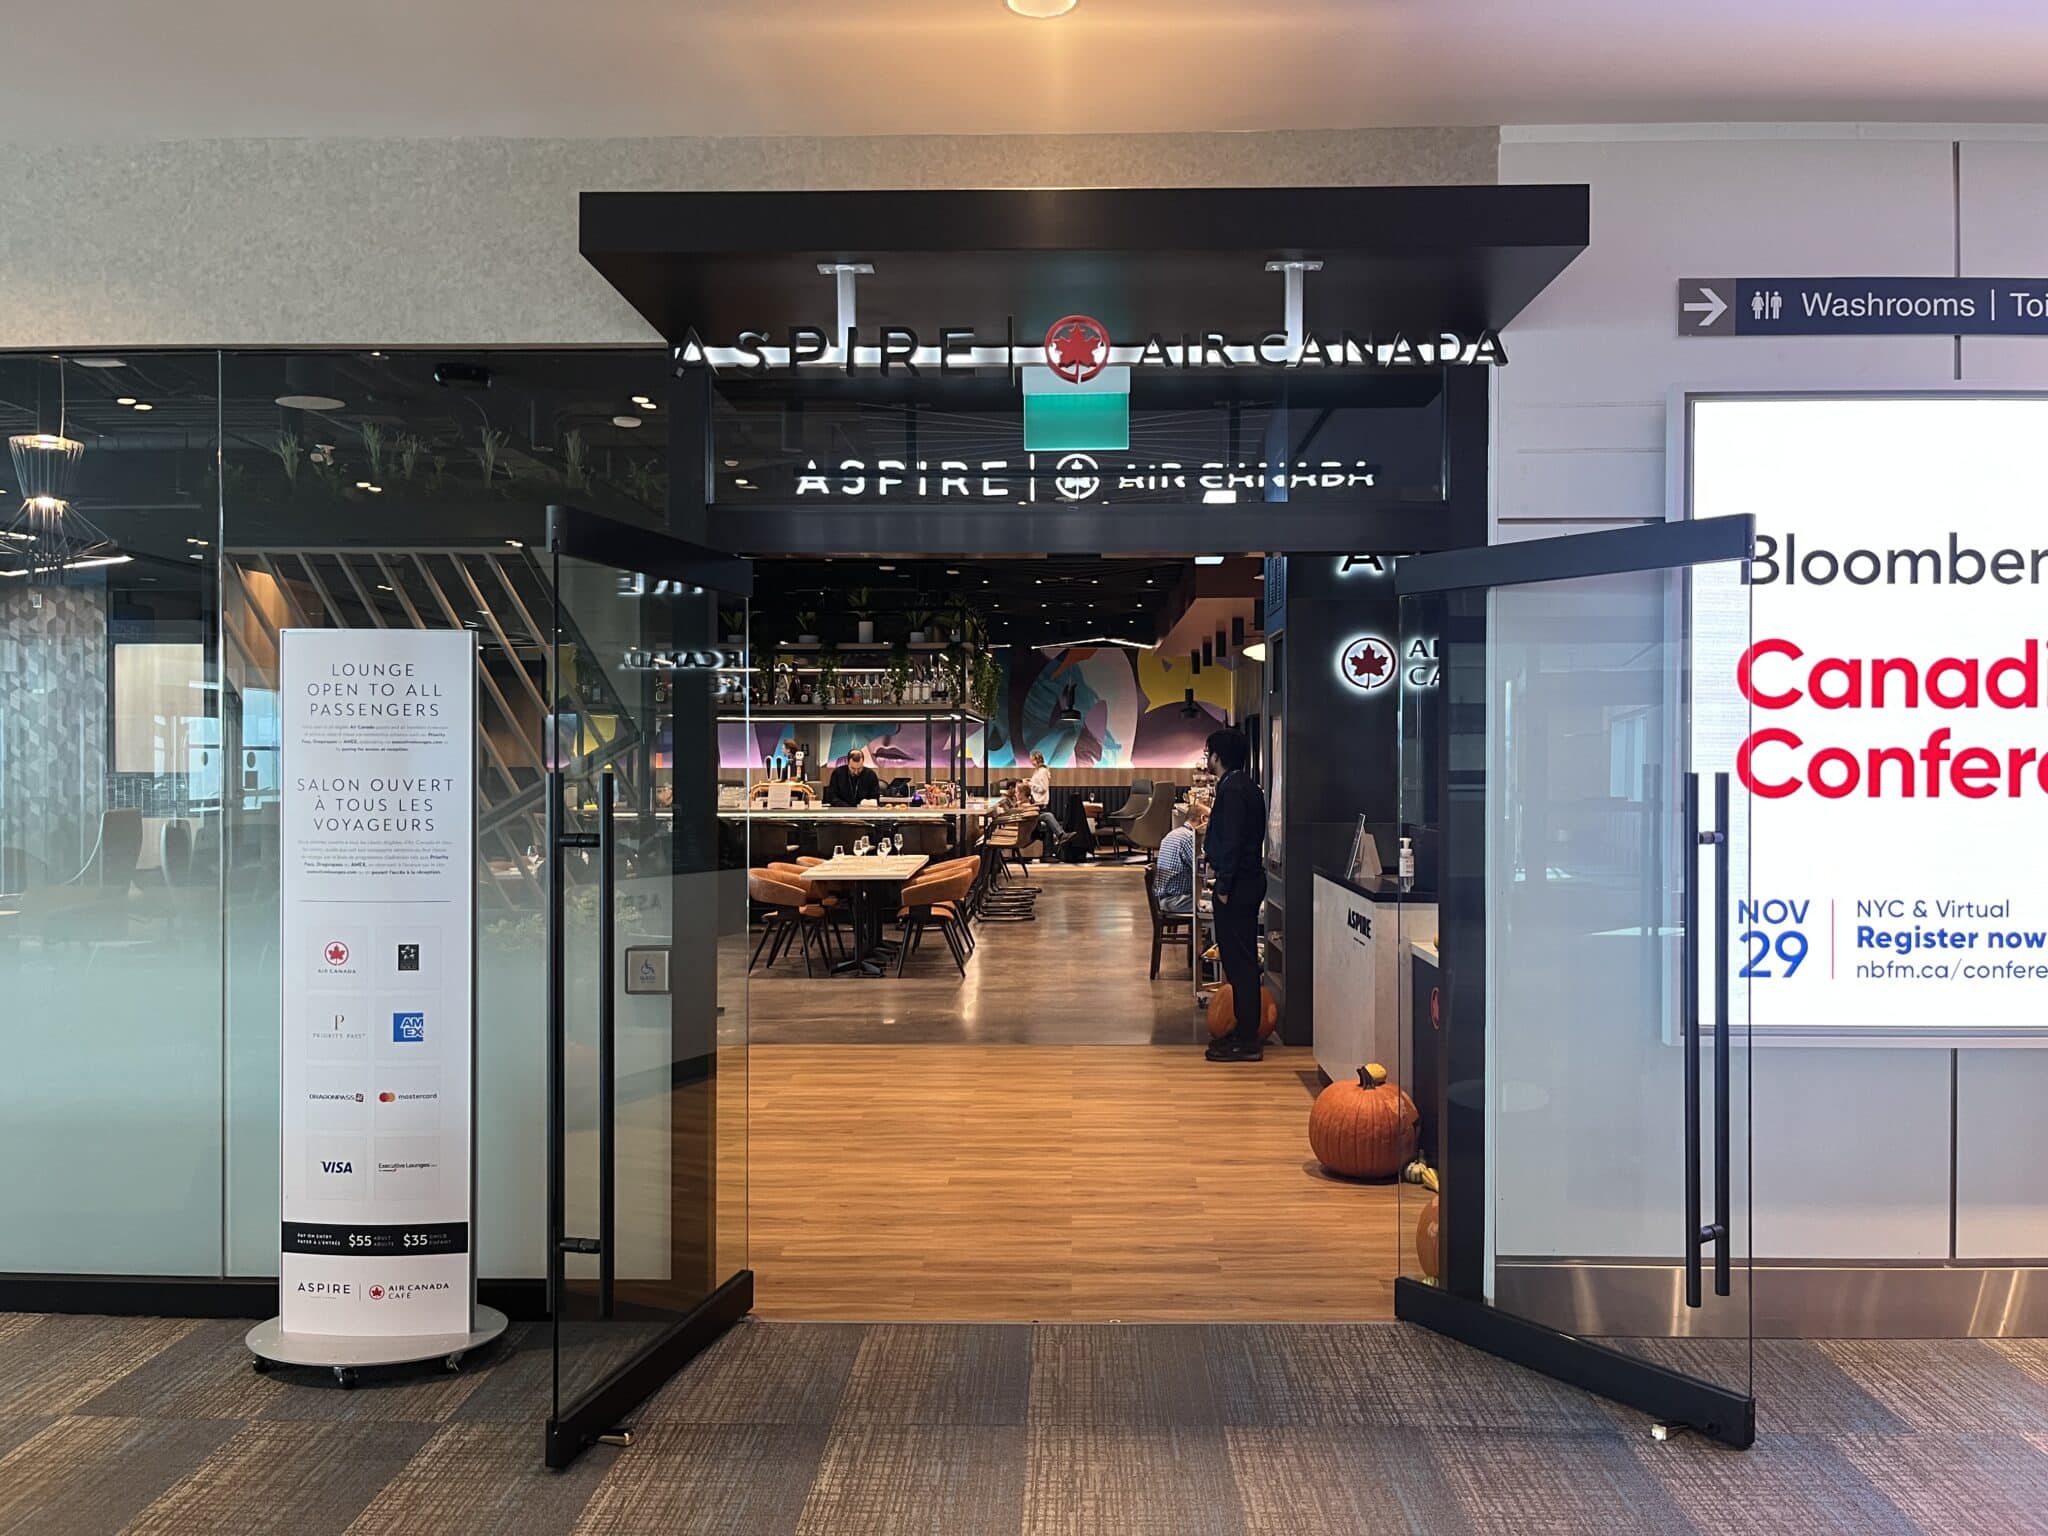 Entrance to the Aspire Air Canada Cafe at Billy Bishop airport.